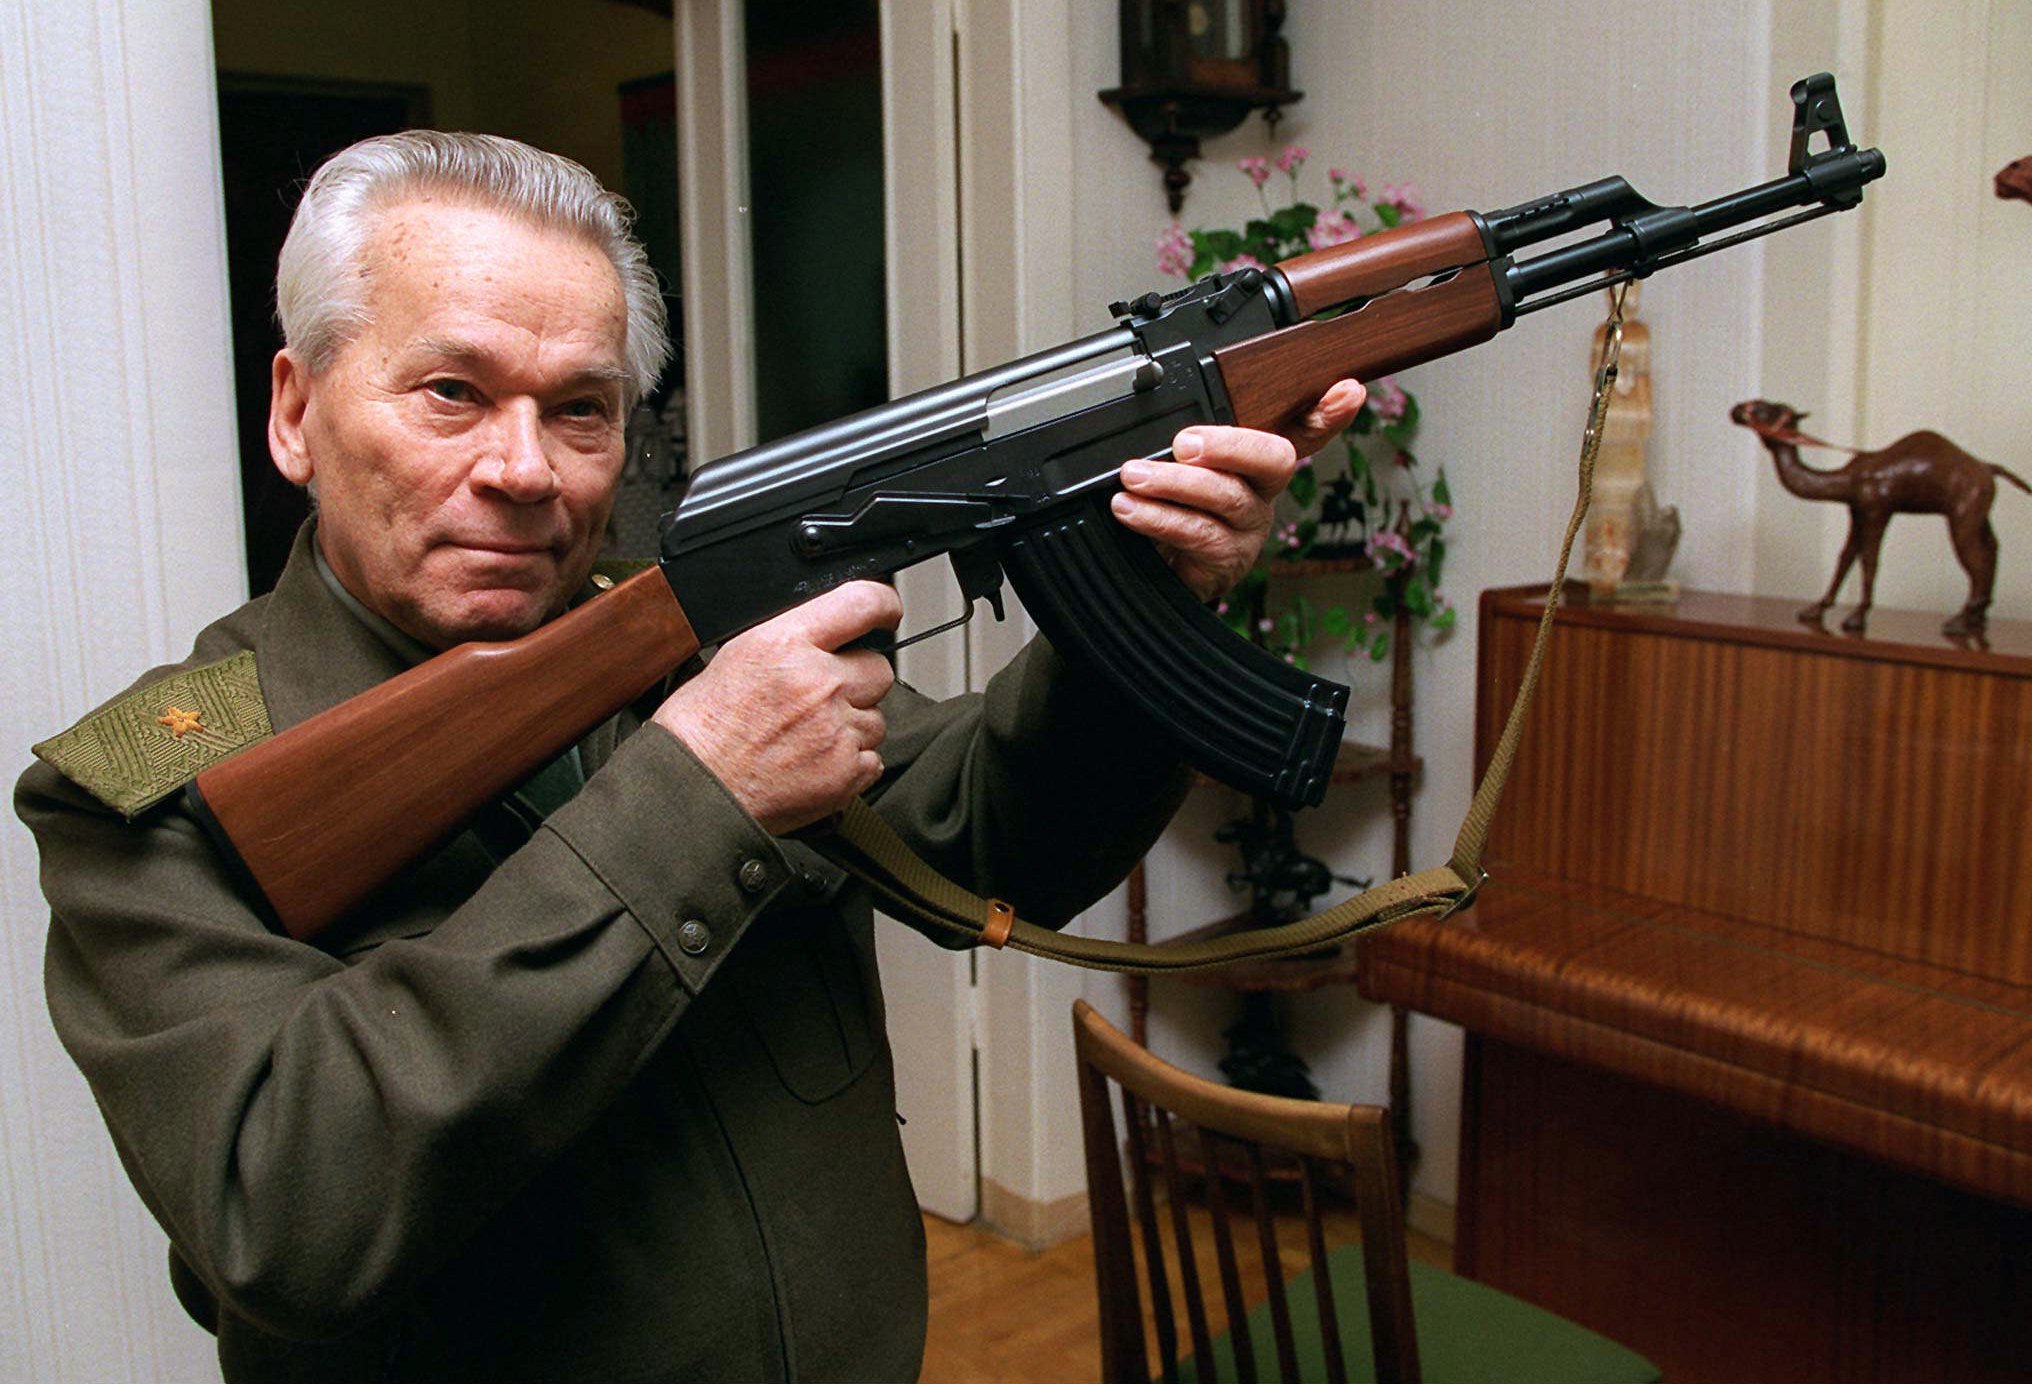 Mikhail Kalashnikov shows a model of the AK-47 assault rifle at his home in the Ural Mountain city of Izhevsk, 1,000 km east of Moscow, Russia, in 1997. Photo: AP